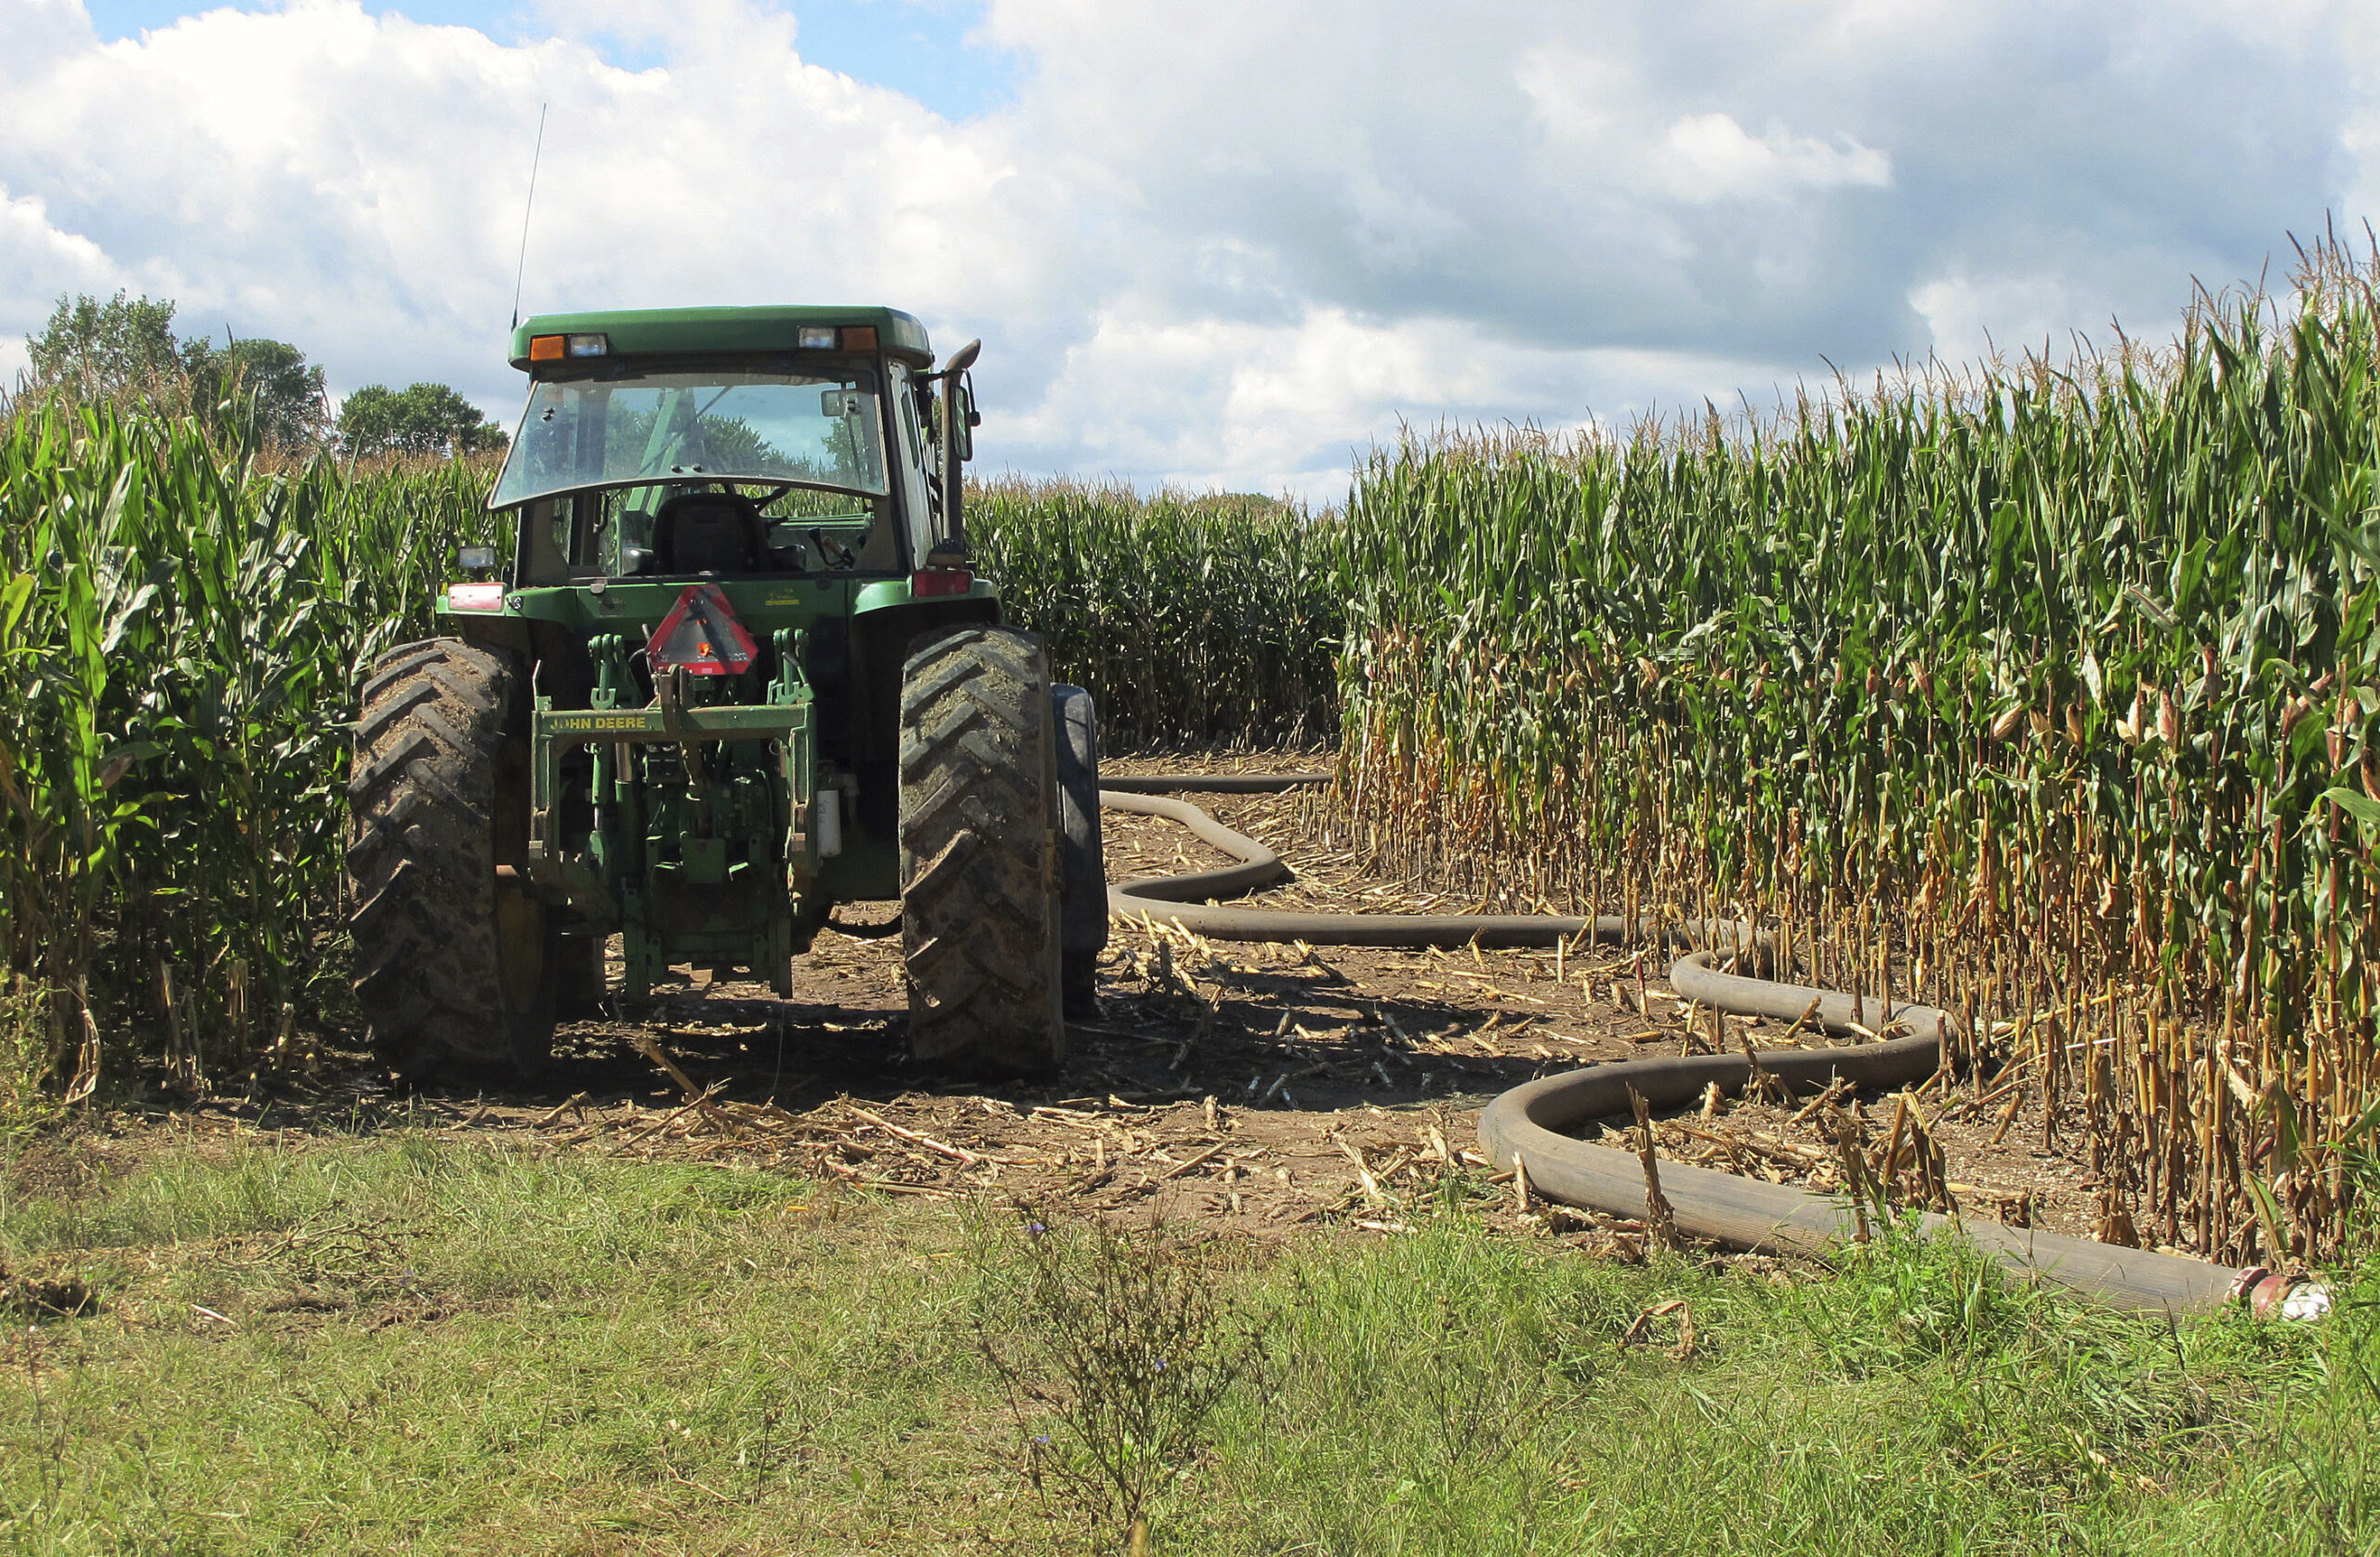 Report: Proposed Changes To DNR Rule Could Cost Farms Millions In Management Costs, Lower Yields